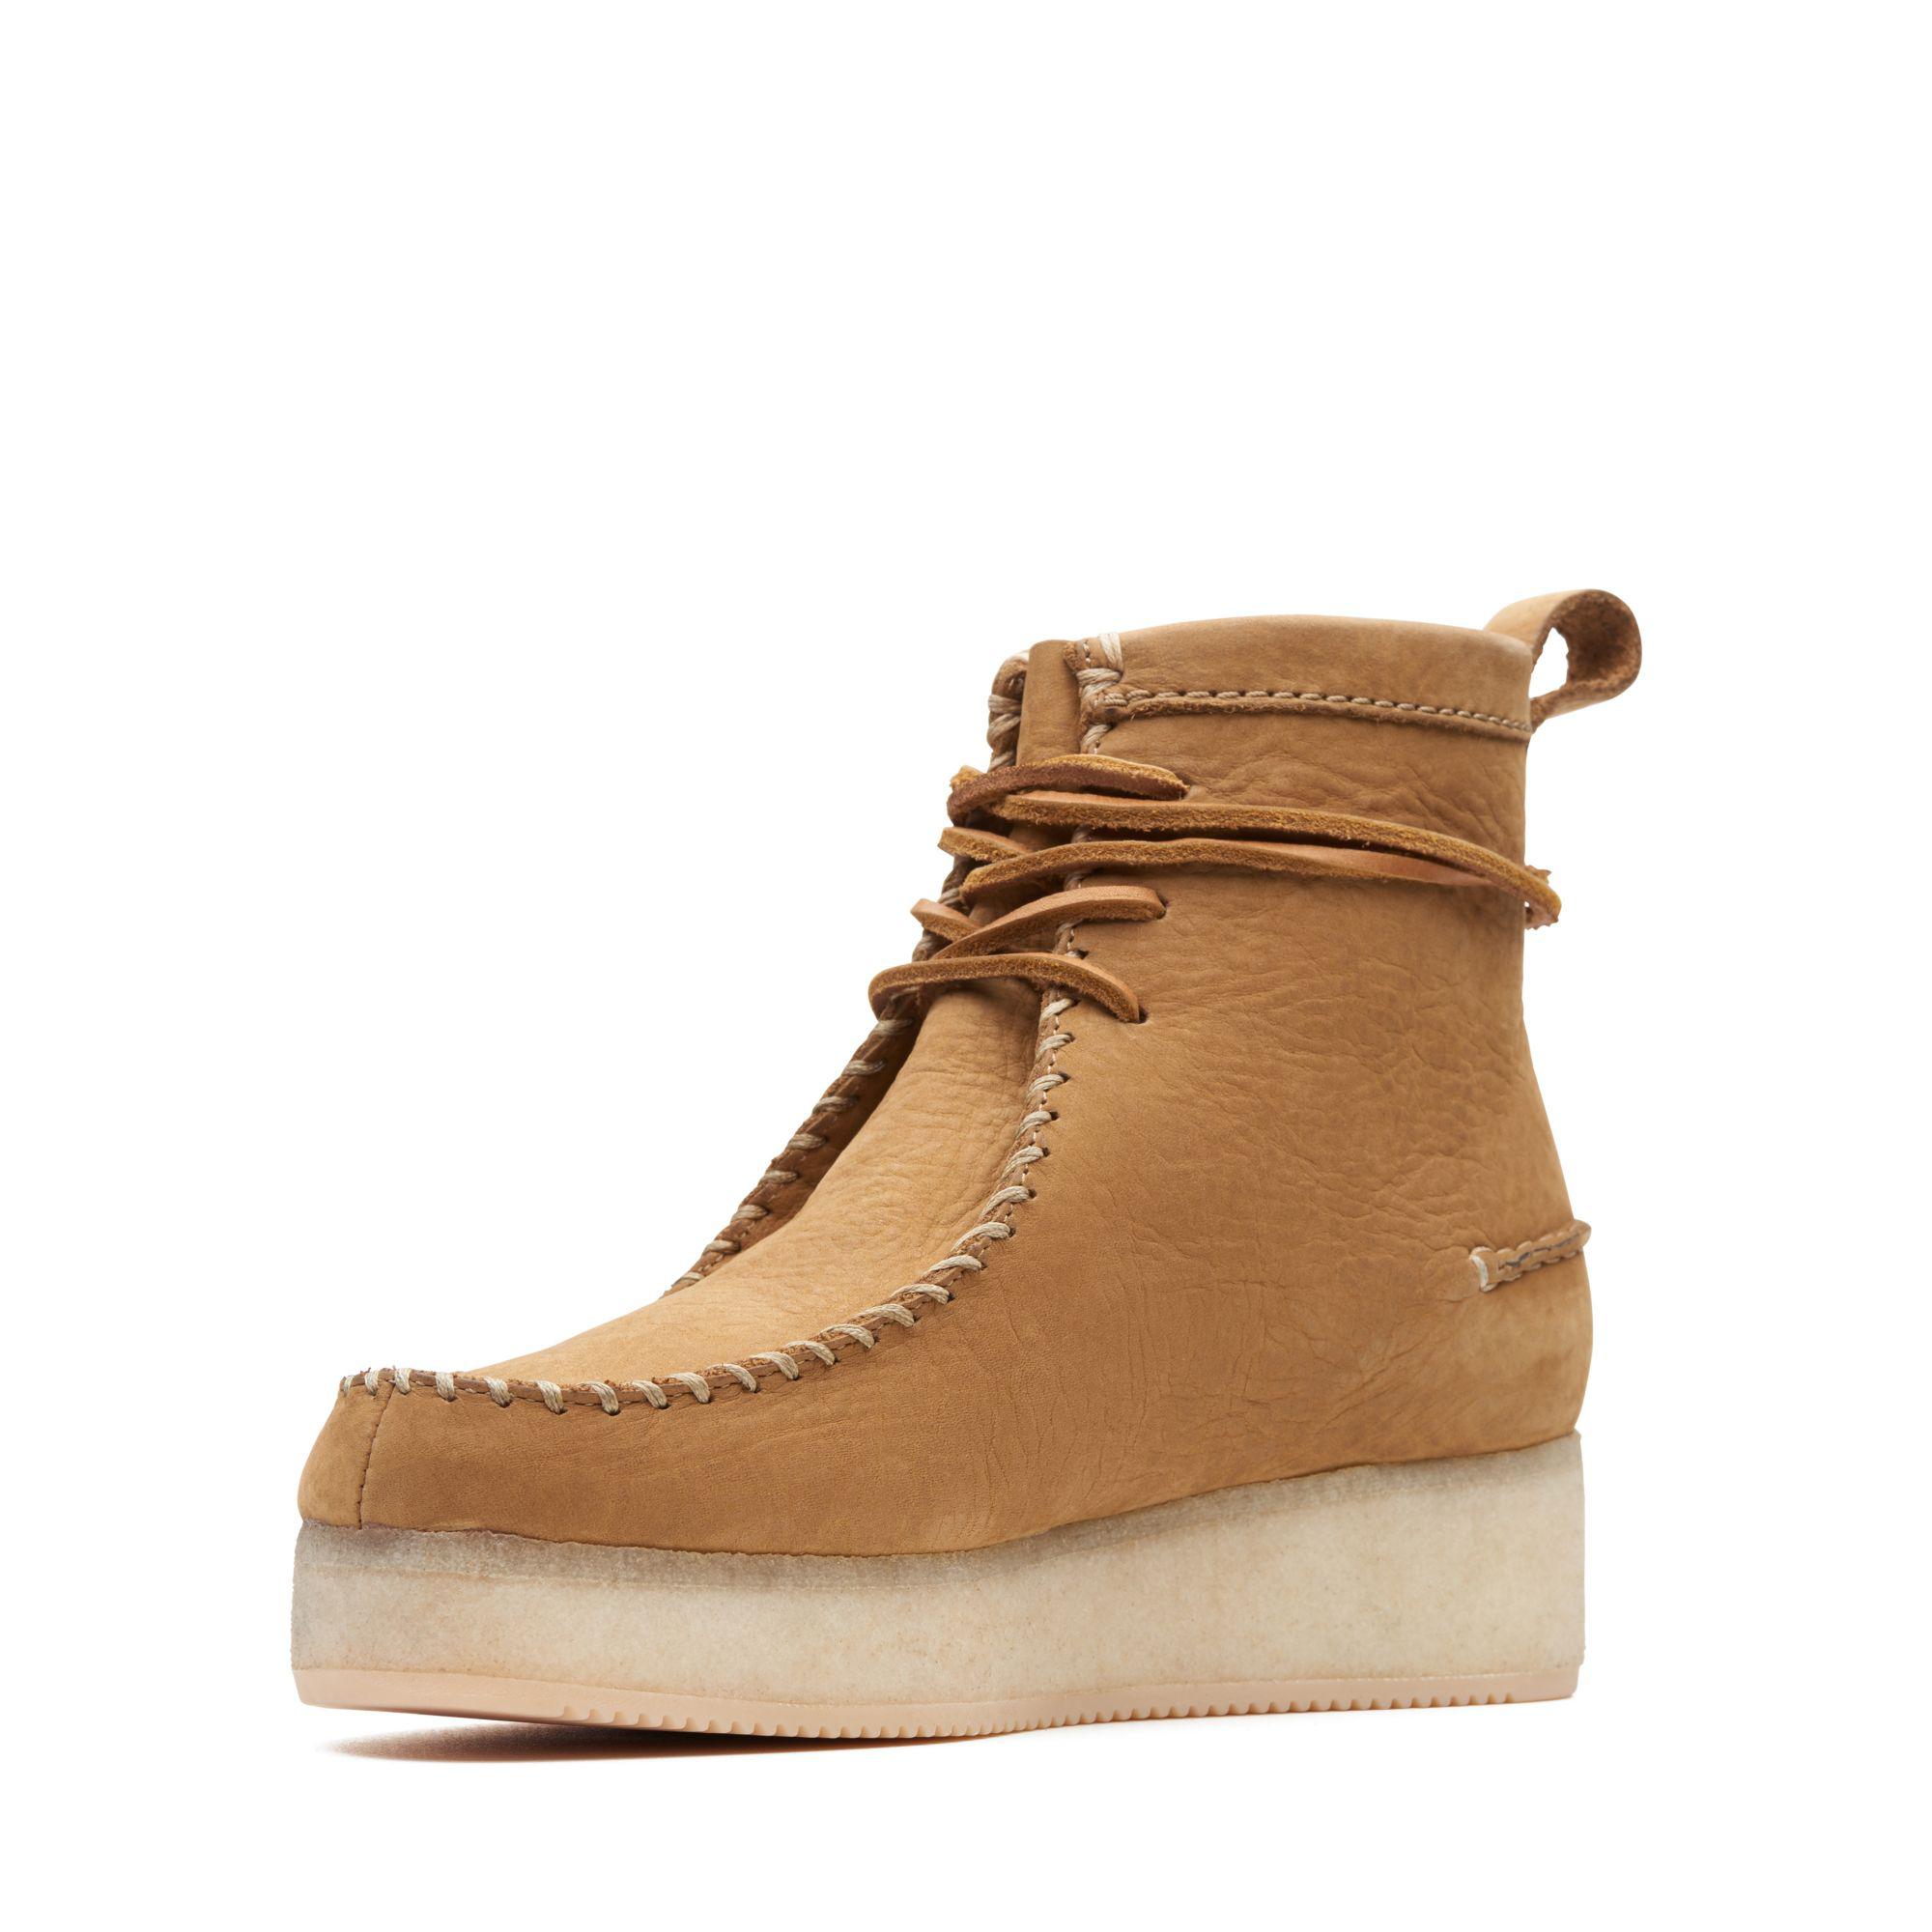 clarks wallabee craft boots